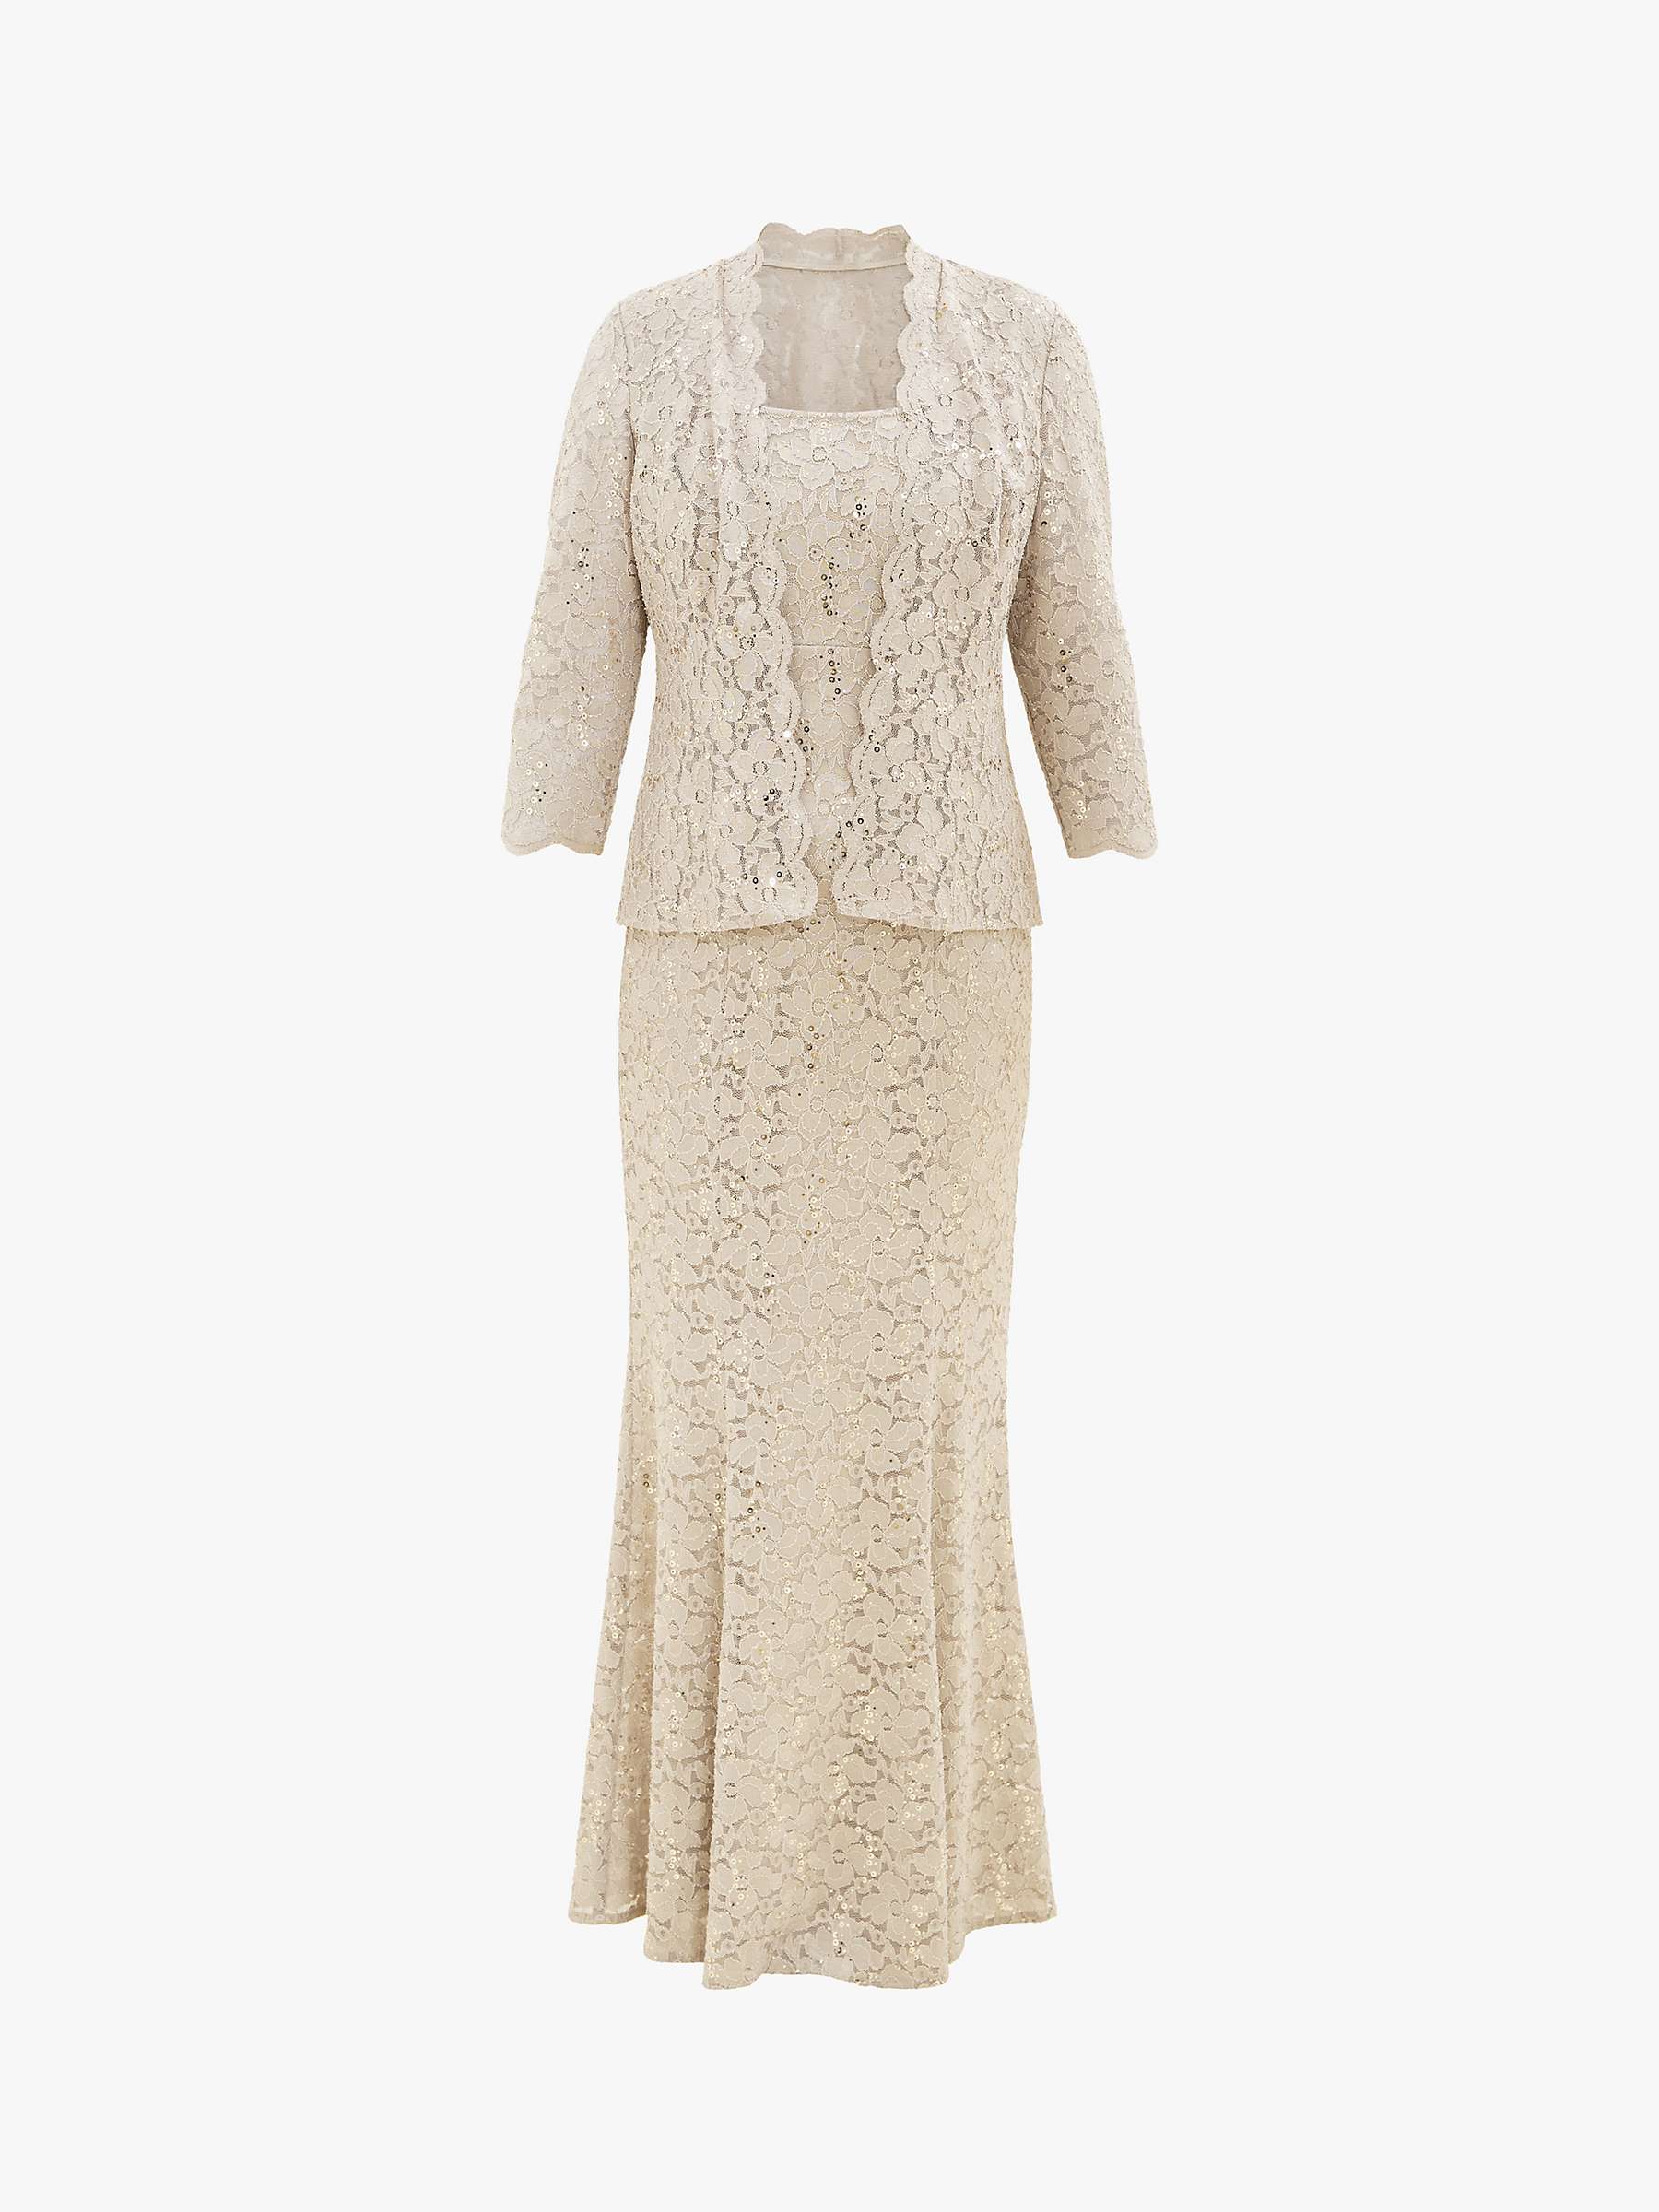 Buy Gina Bacconi Carissa Sequin Lace Maxi Dress and Jacket, Champagne Online at johnlewis.com